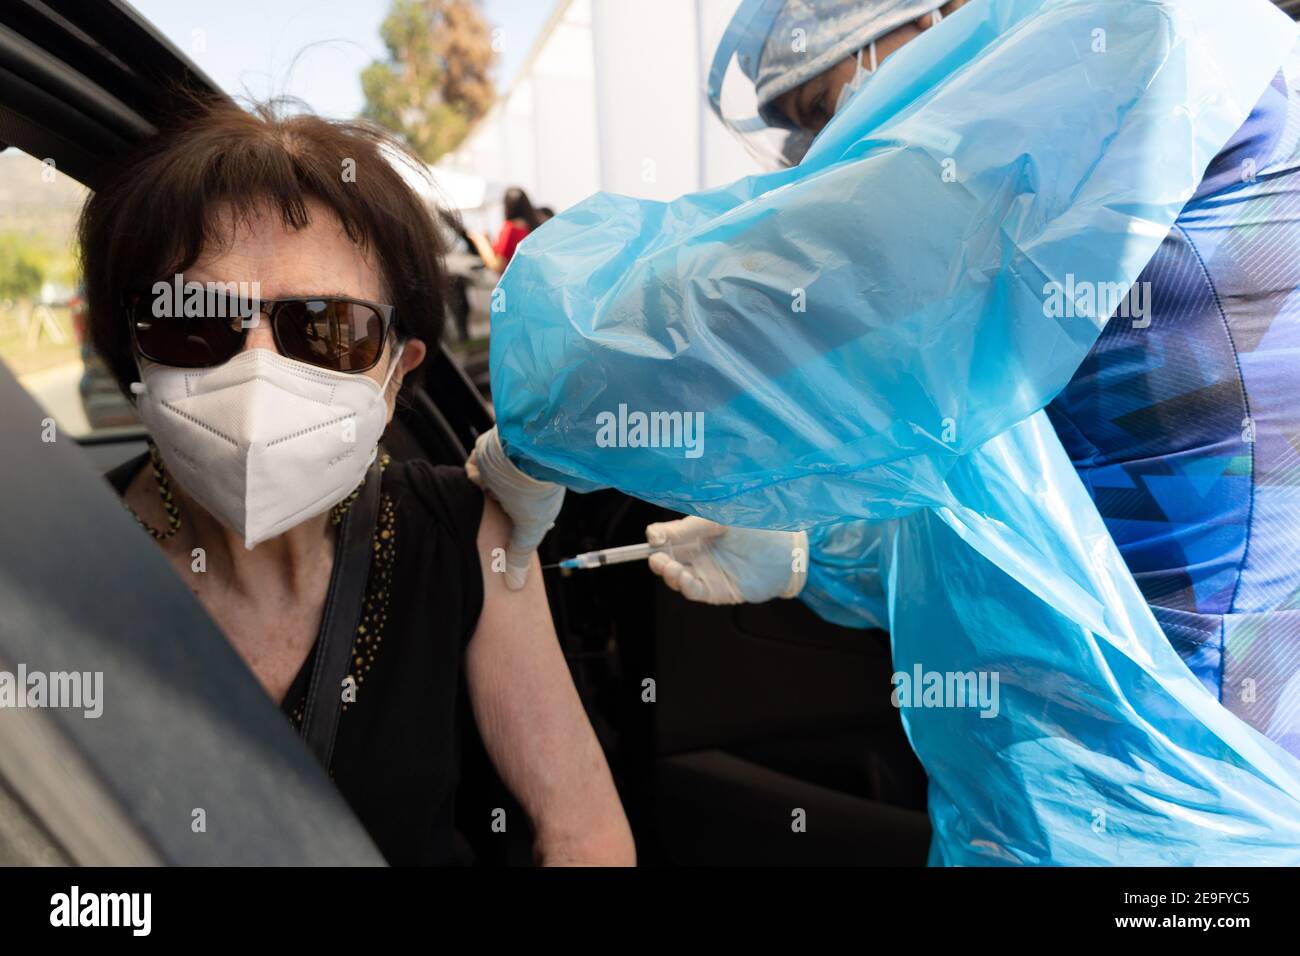 Santiago, Metropolitana, Chile. 4th Feb, 2021. A woman is vaccinated in the car, with the Sinovac vaccine, on the second day of mass vaccination in Chile. Credit: Matias Basualdo/ZUMA Wire/Alamy Live News Stock Photo